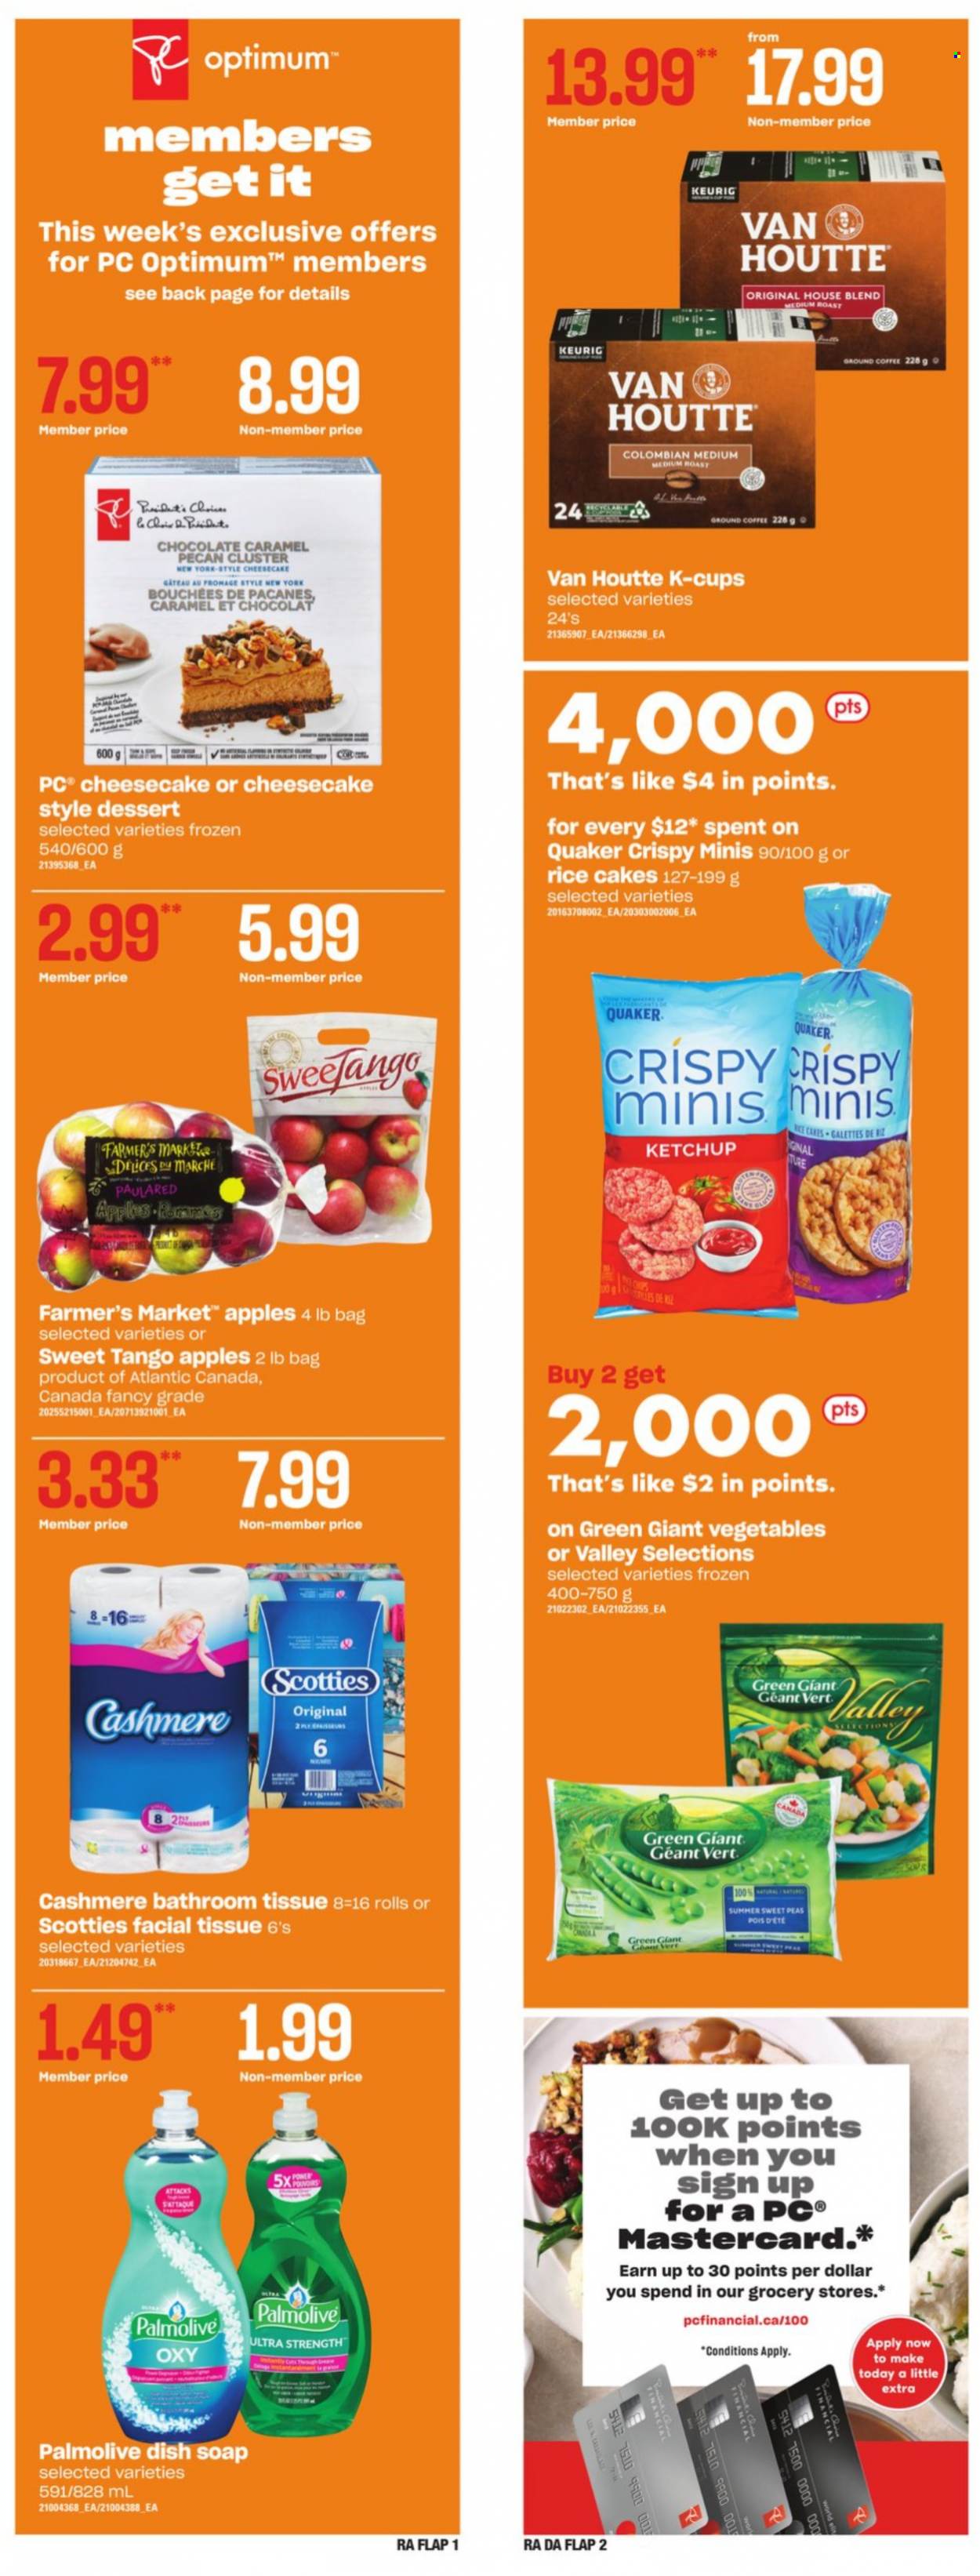 thumbnail - Atlantic Superstore Flyer - September 23, 2021 - September 29, 2021 - Sales products - cheesecake, peas, apples, Quaker, chocolate, caramel, coffee capsules, K-Cups, Keurig, bath tissue, Palmolive, soap, Optimum, ketchup. Page 13.